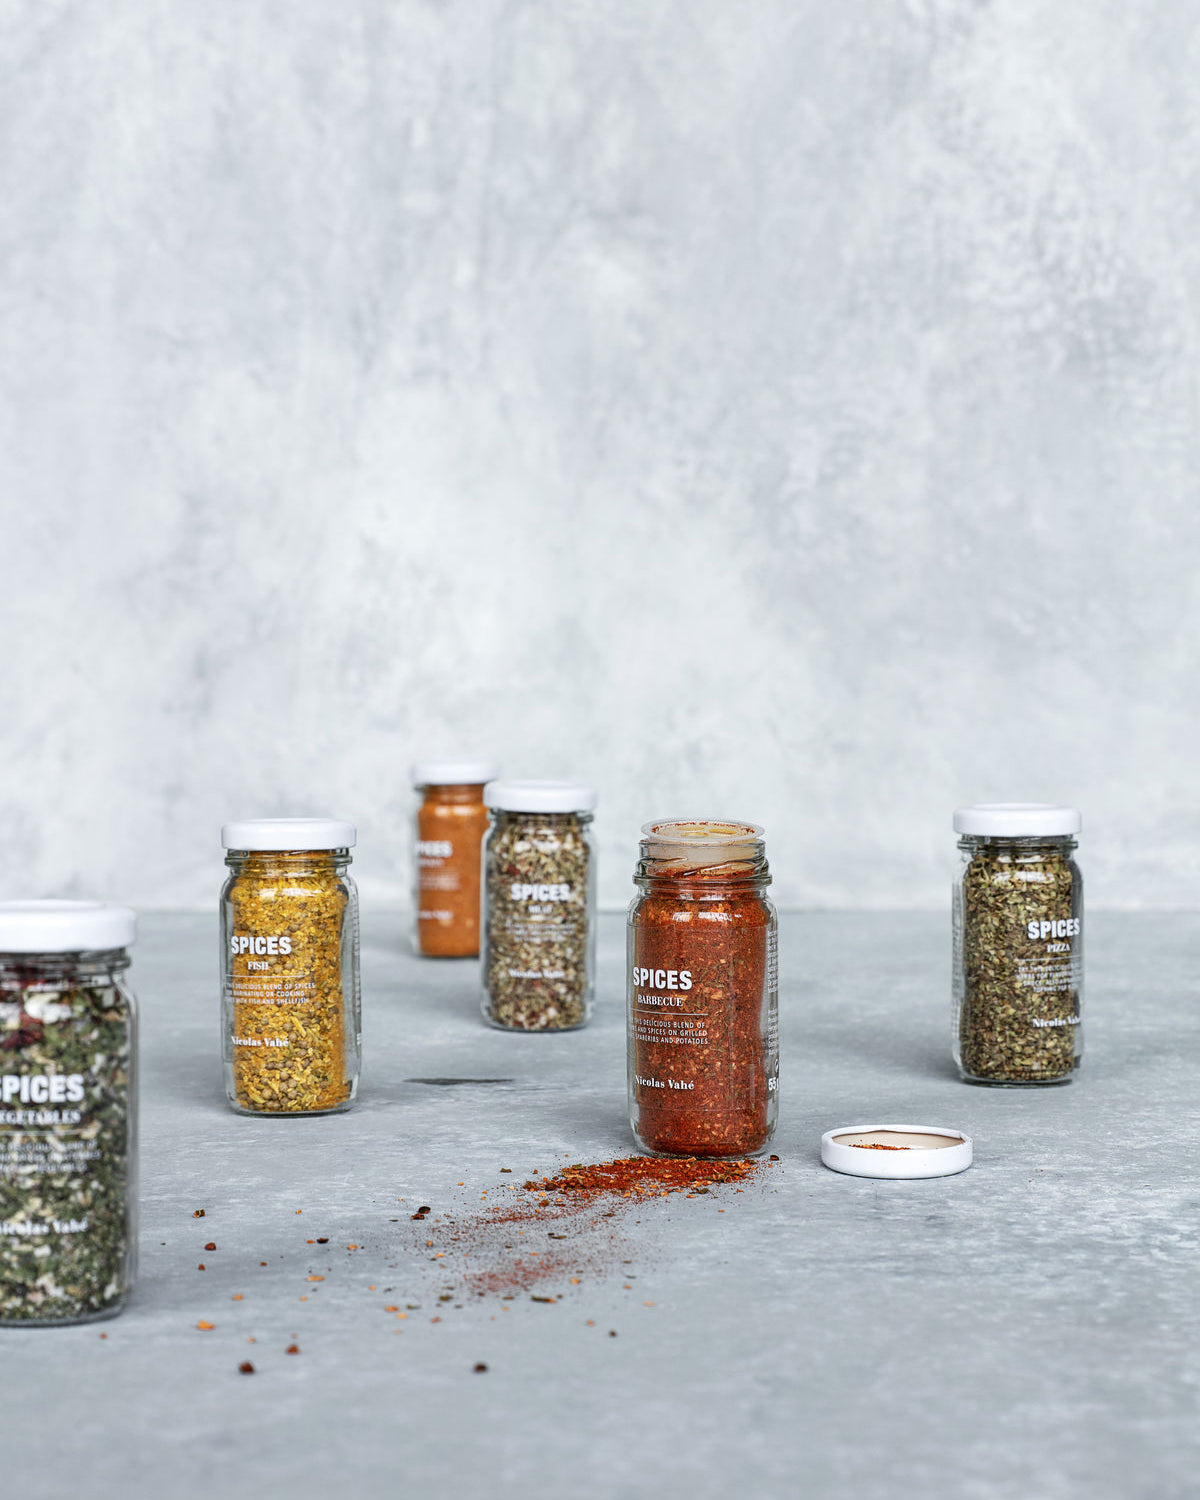 Nicolas Vah  Spices with Smoked Chili, Pepper + Parsley by Society of Lifestyle